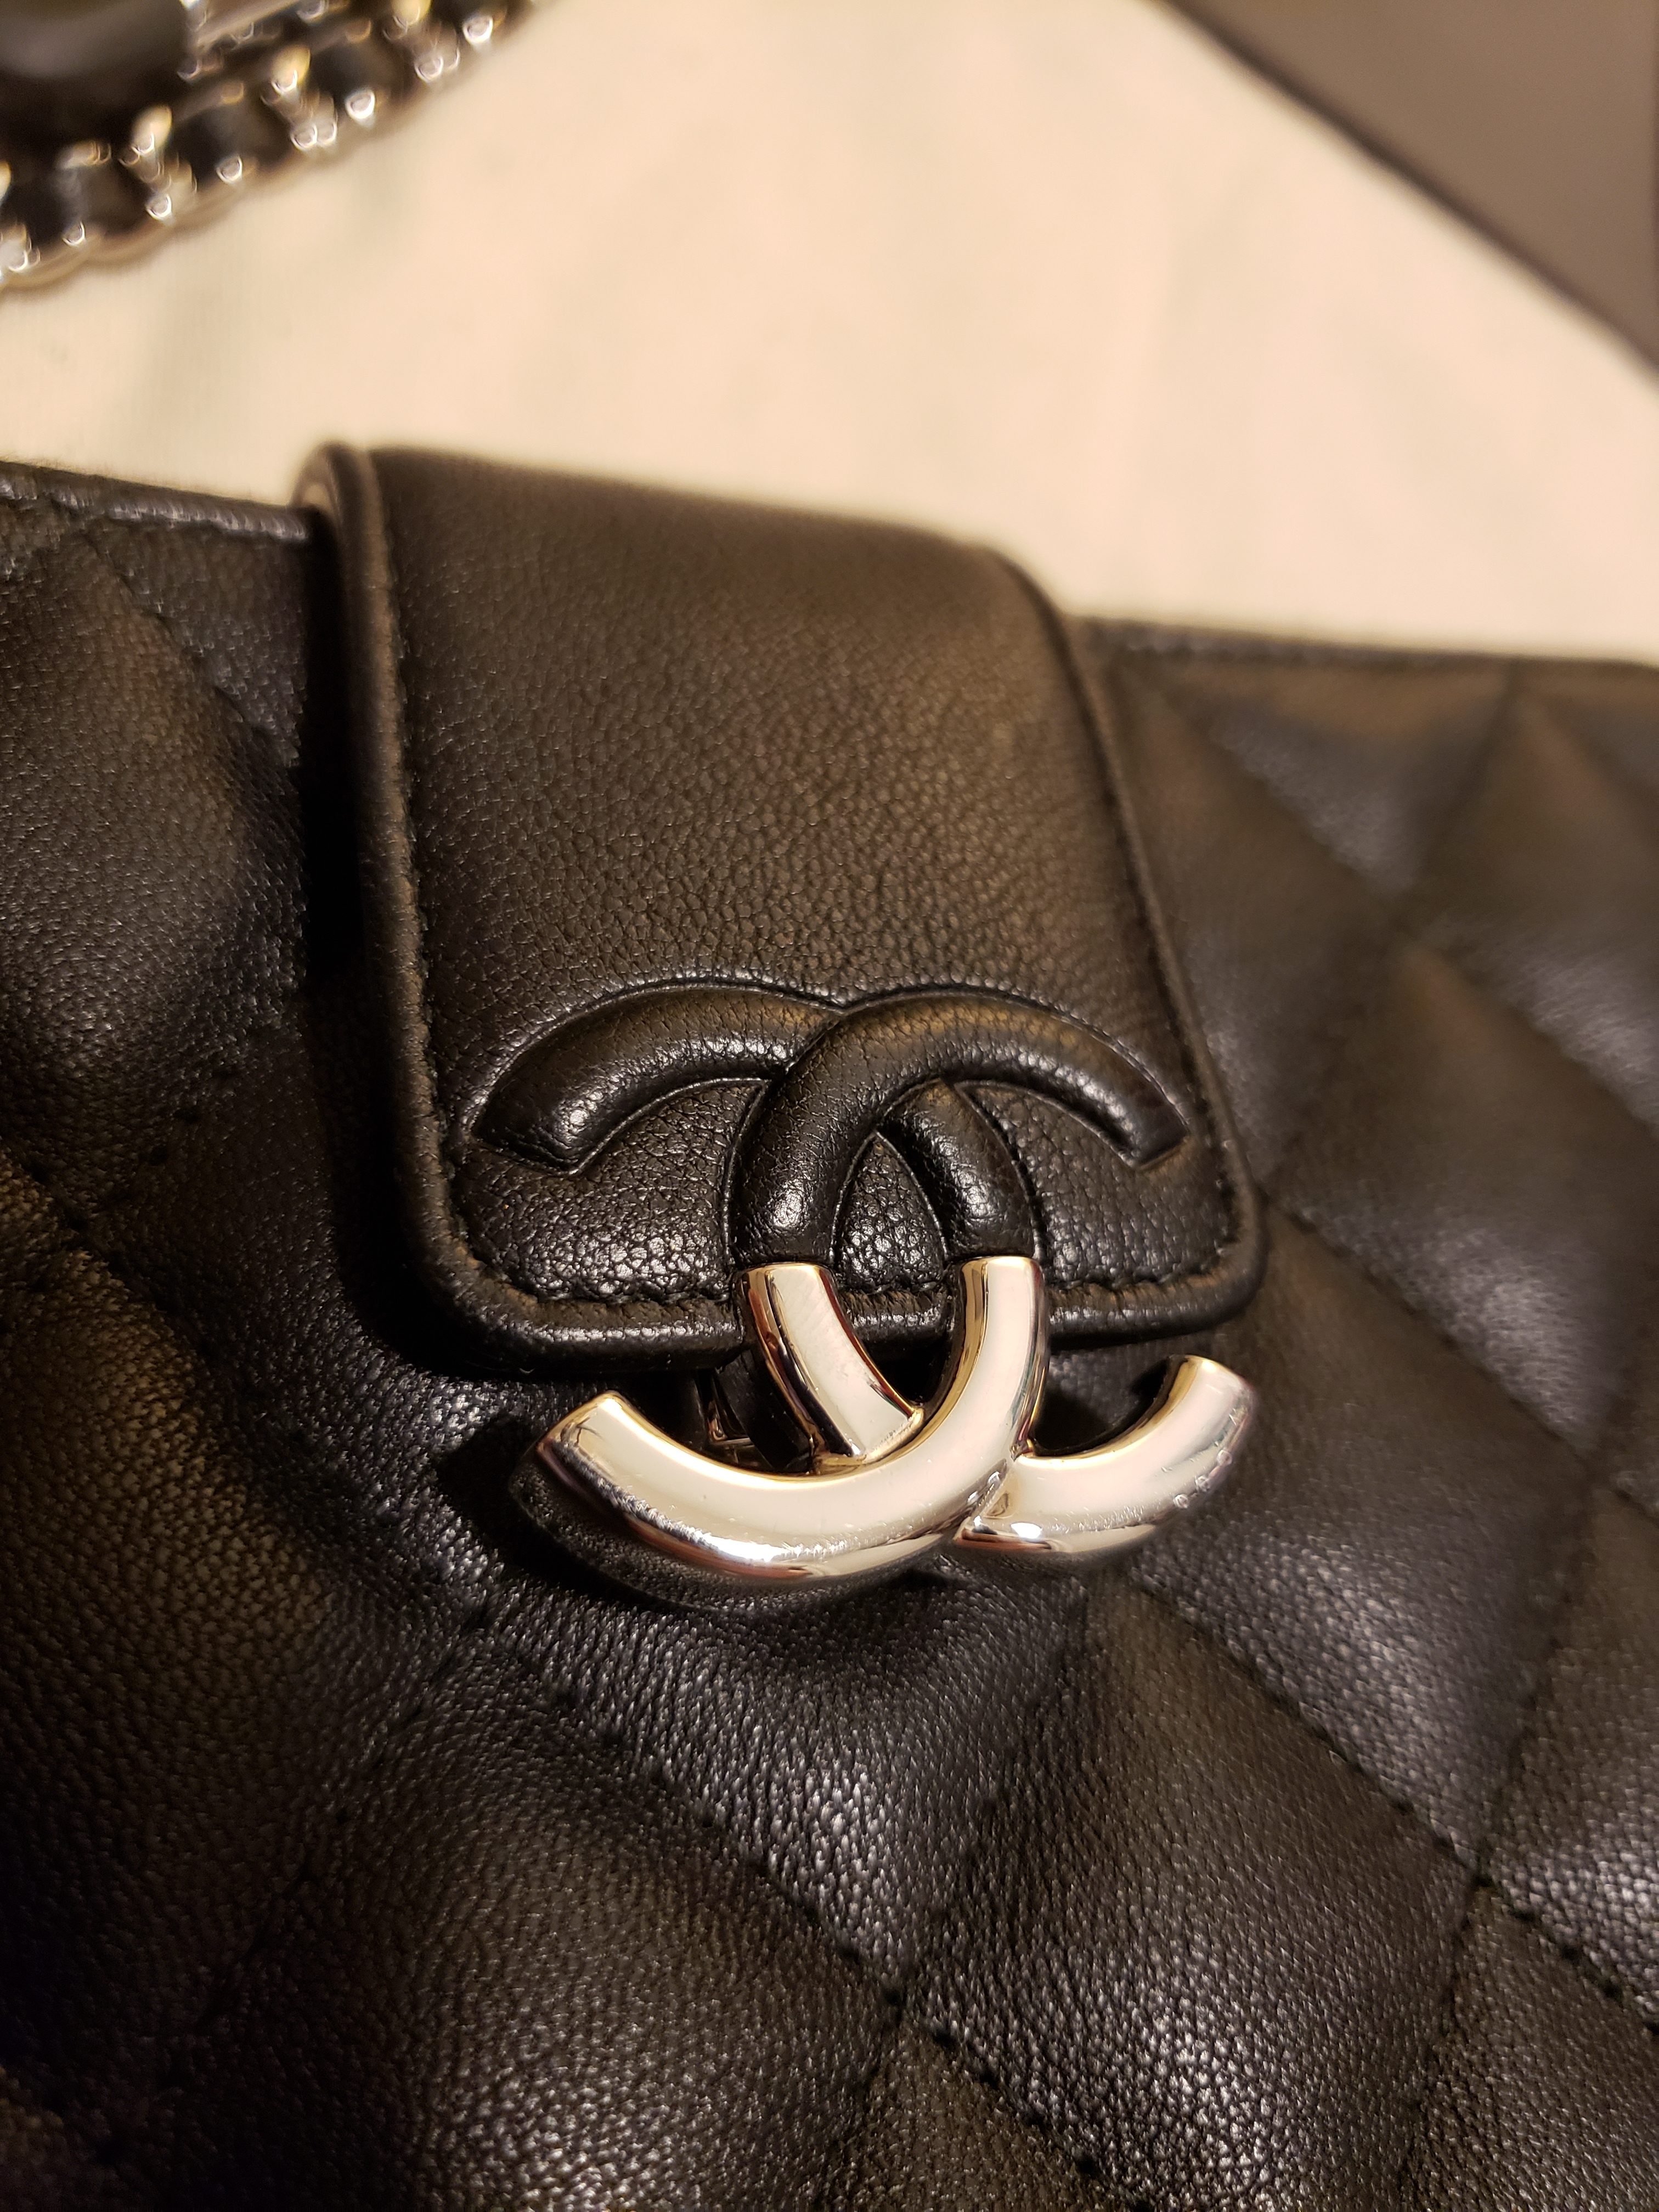 Chanel Vintage Classic Flap Review & Fashionphile Shopping Experience